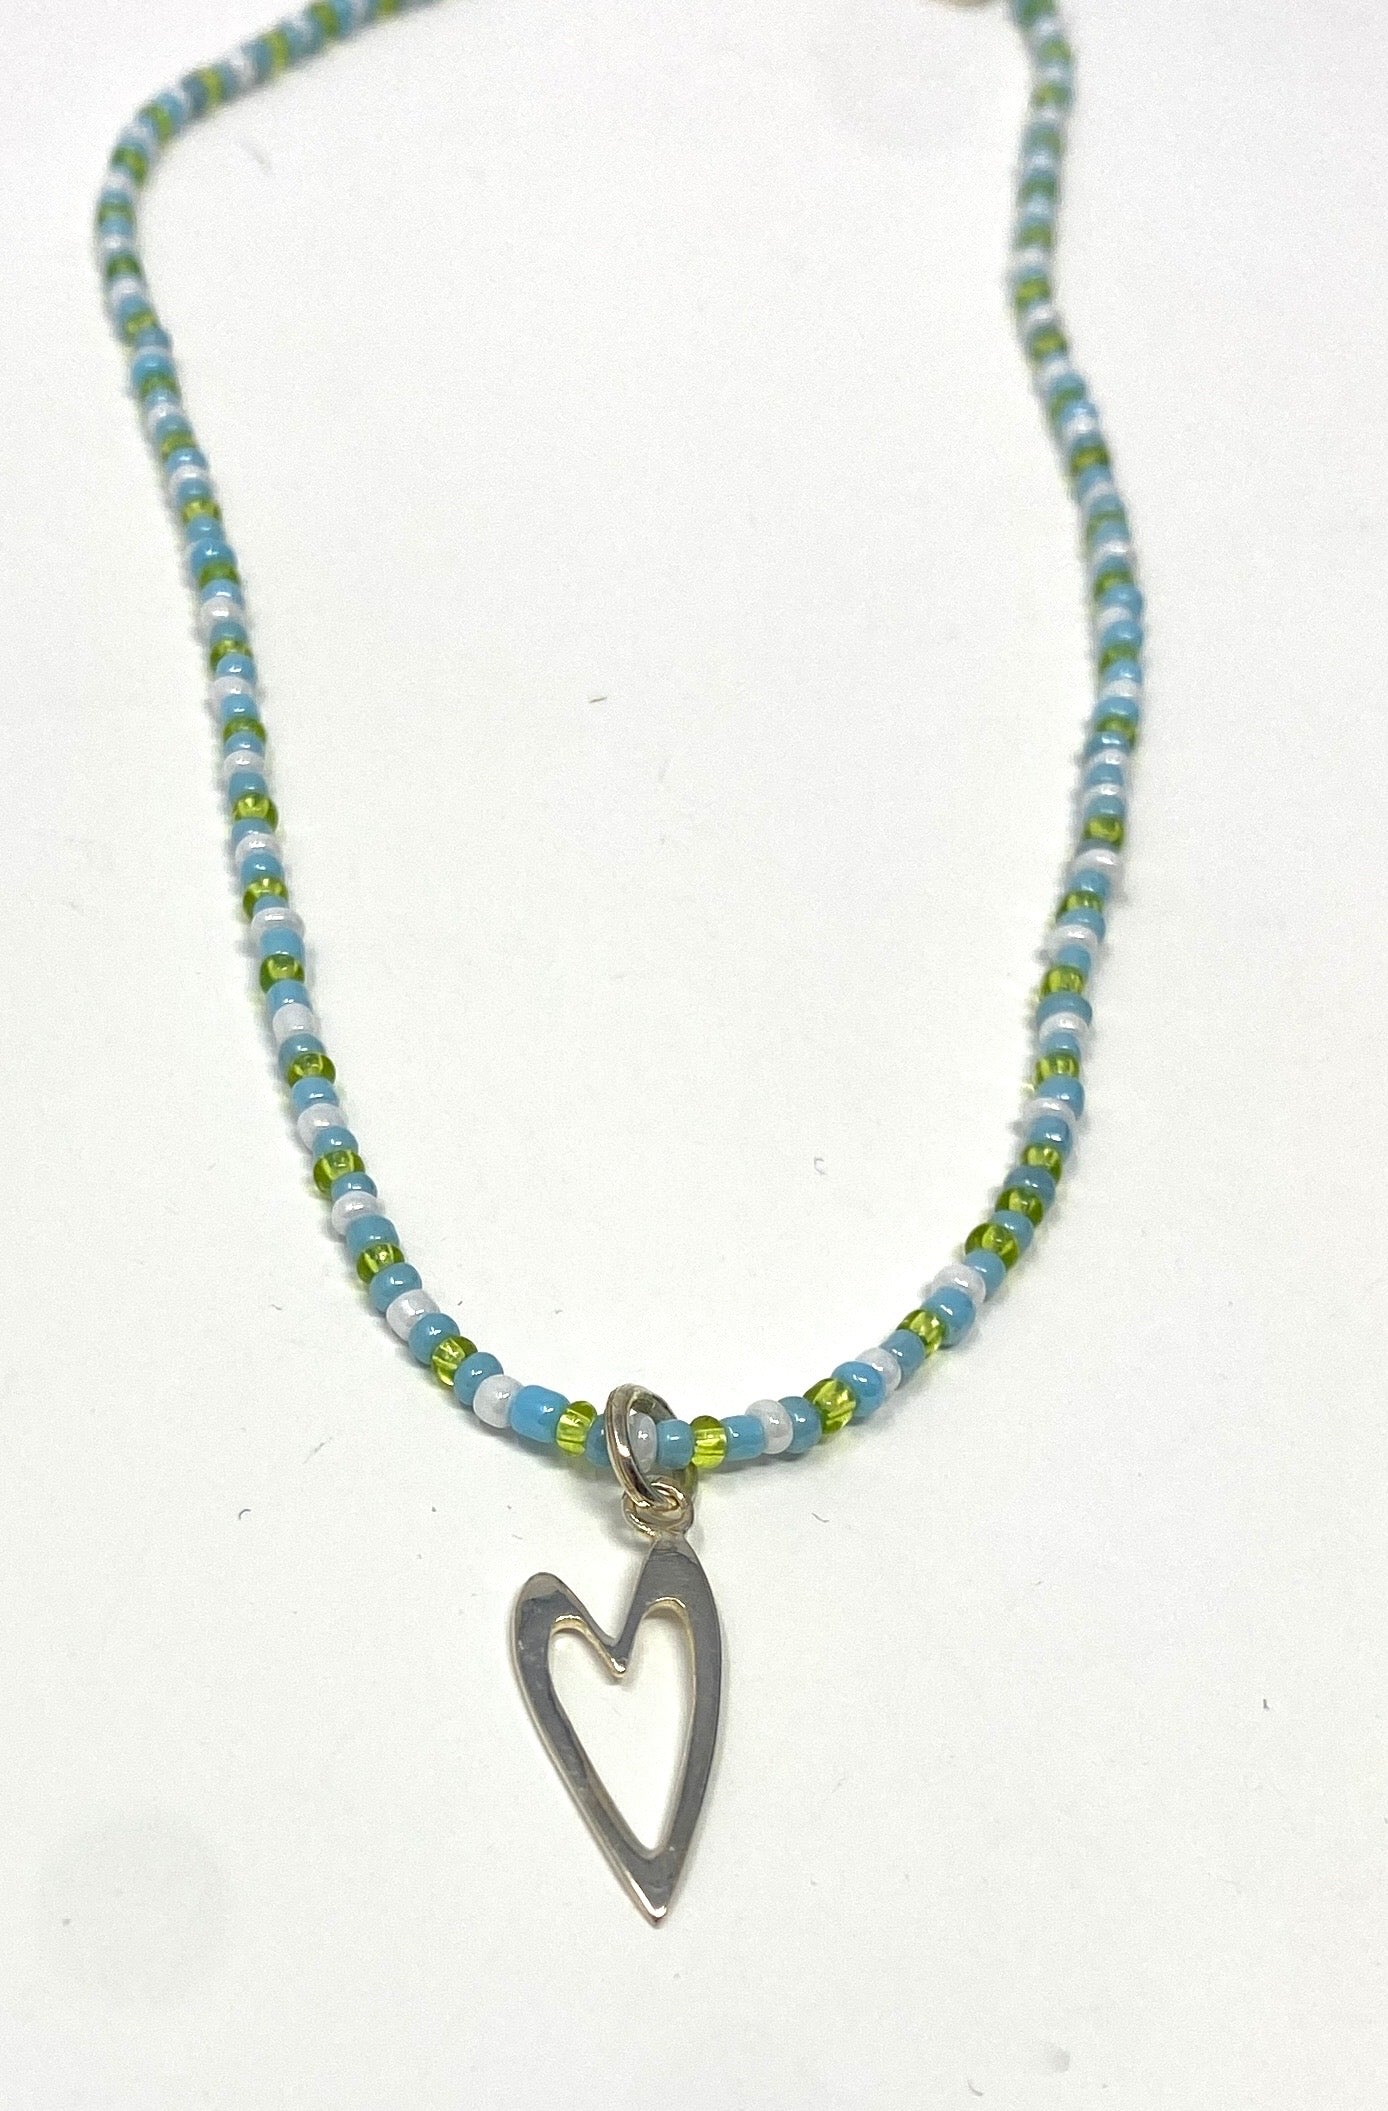 Tiny Lime Green, White, and Turquoise Seed Bead Necklace With Sterling Silver Heart Pendant